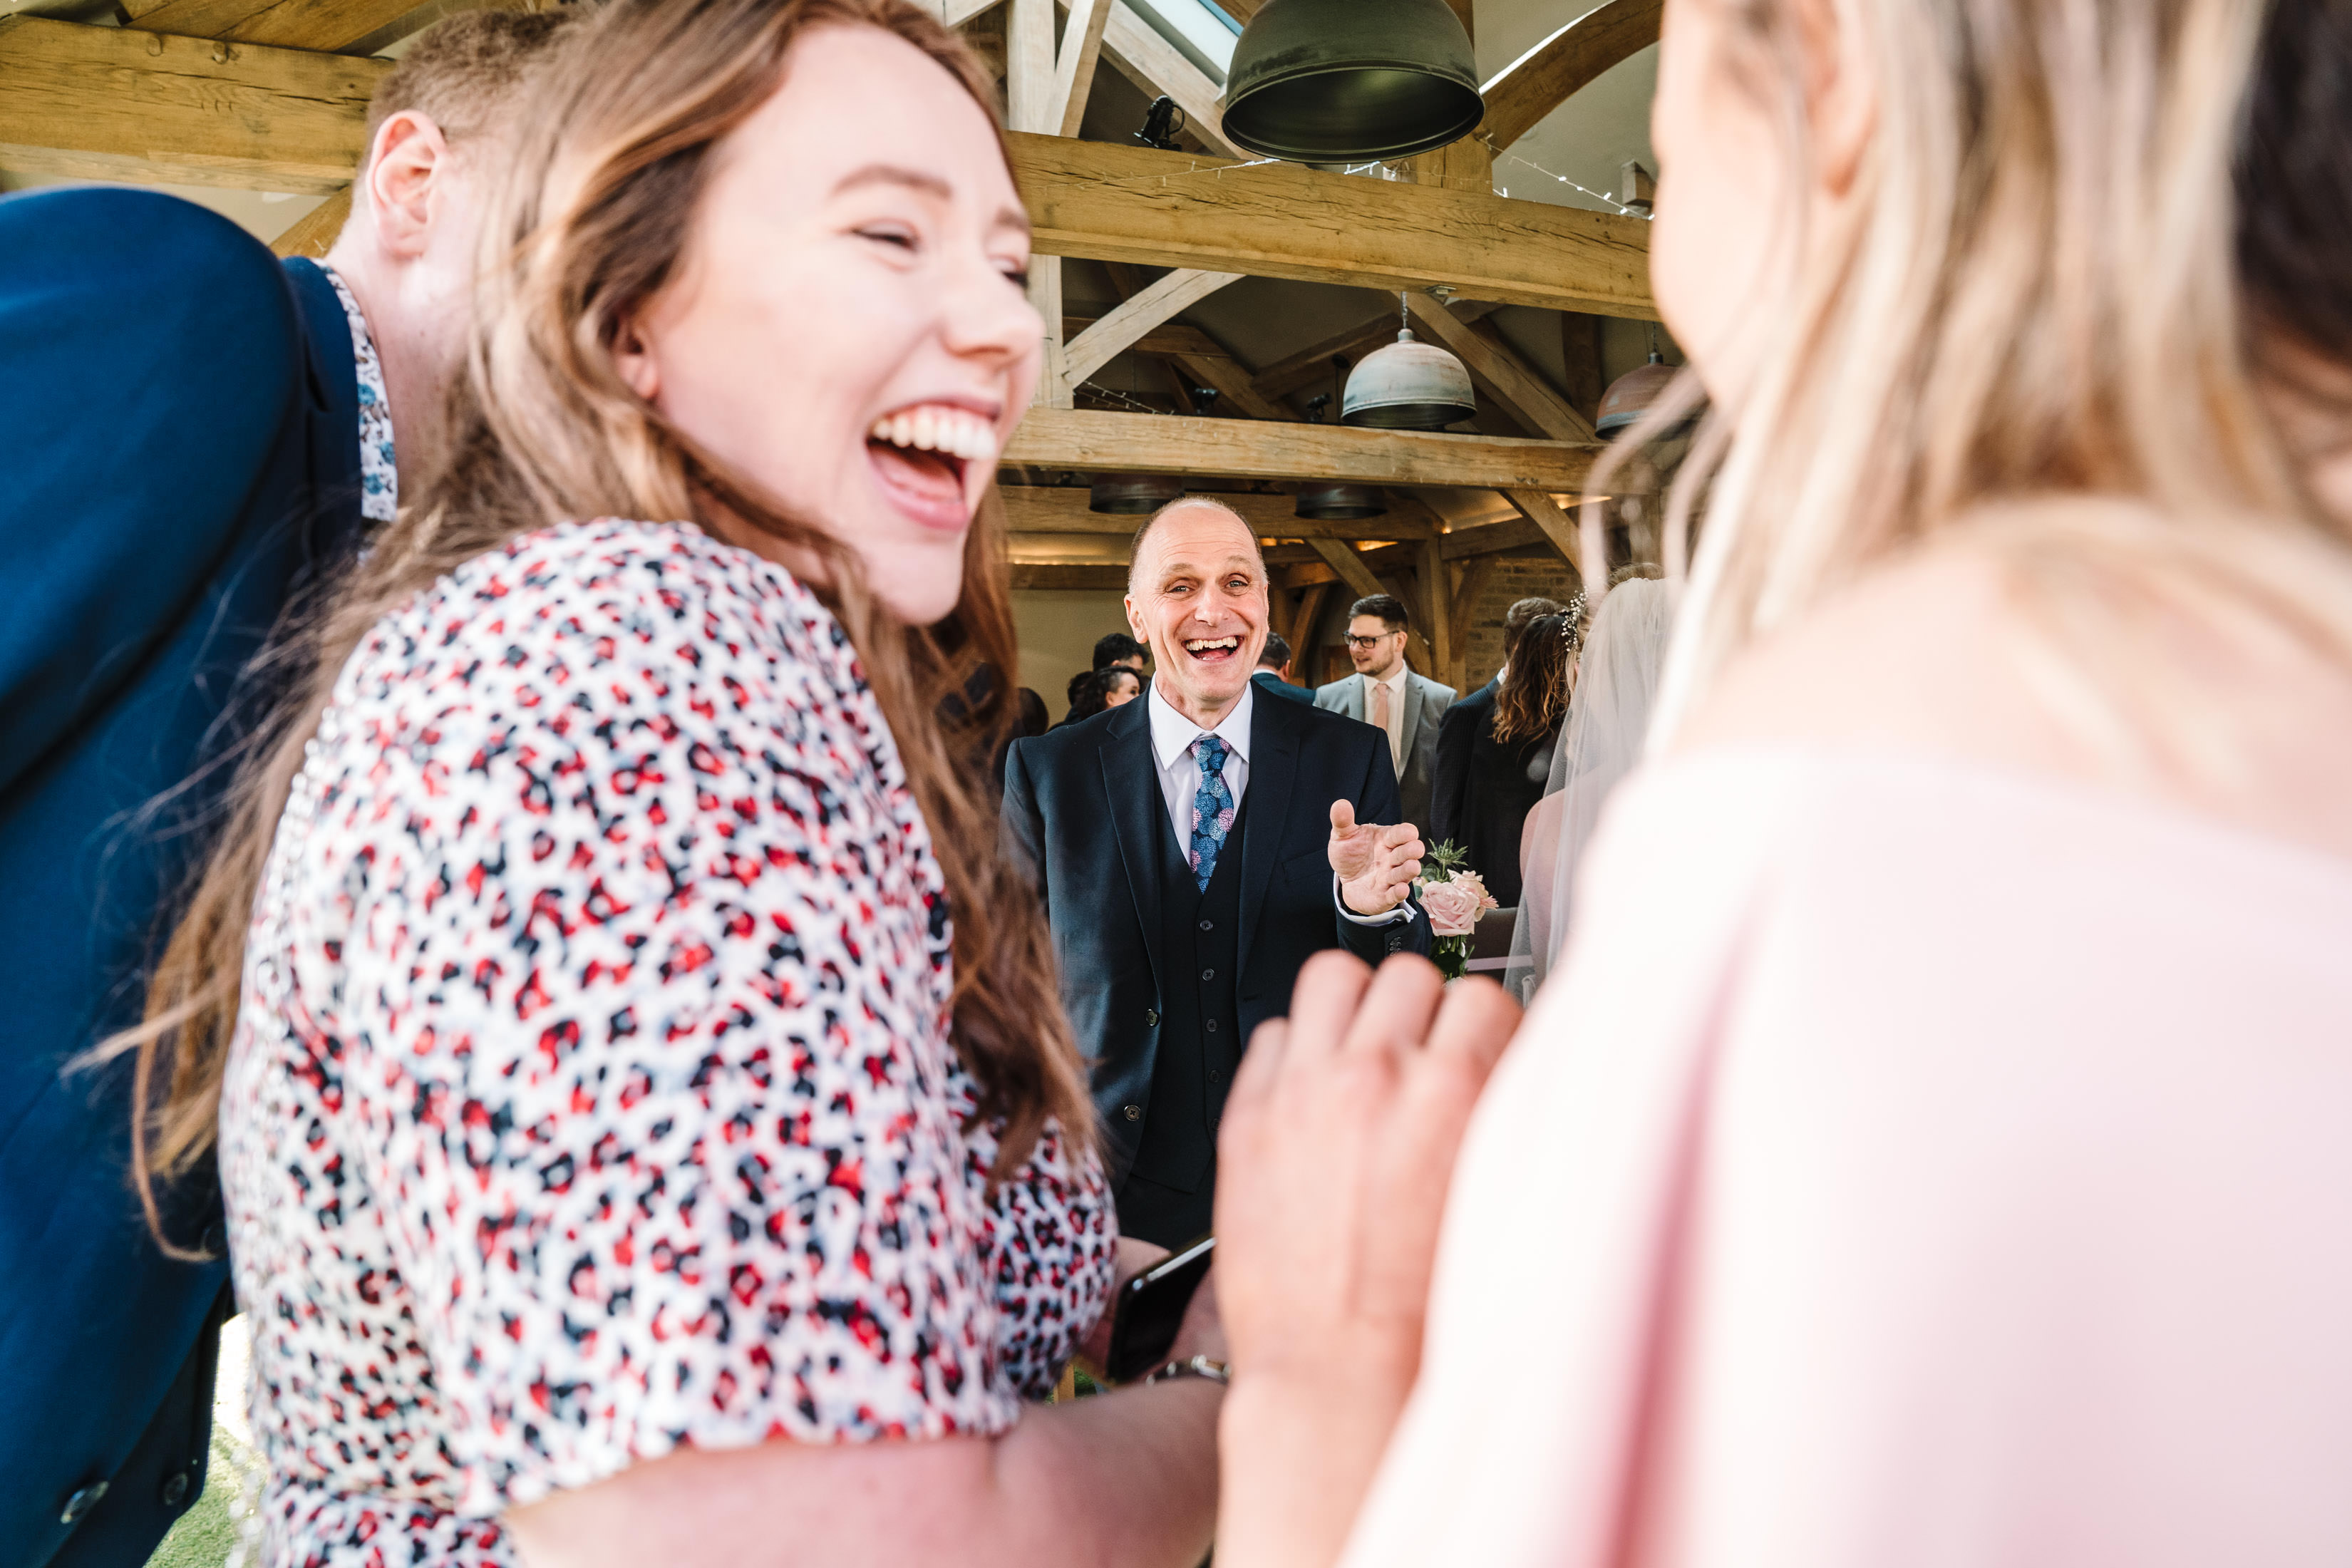 Guests laughing at white hart in wedding